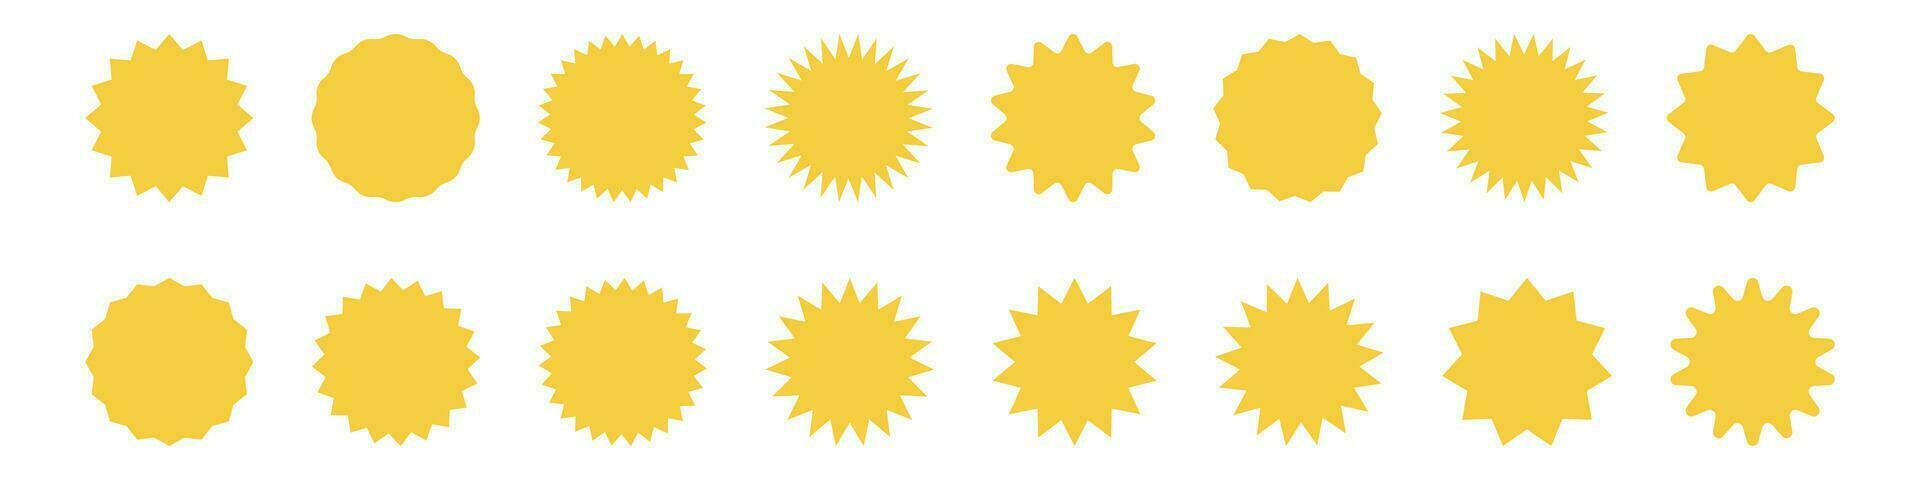 Yellow shopping labels collection. Special offer price tag. Sale or discount sticker. Supermarket promotional badge. Sunburst icons. Stock vector. vector